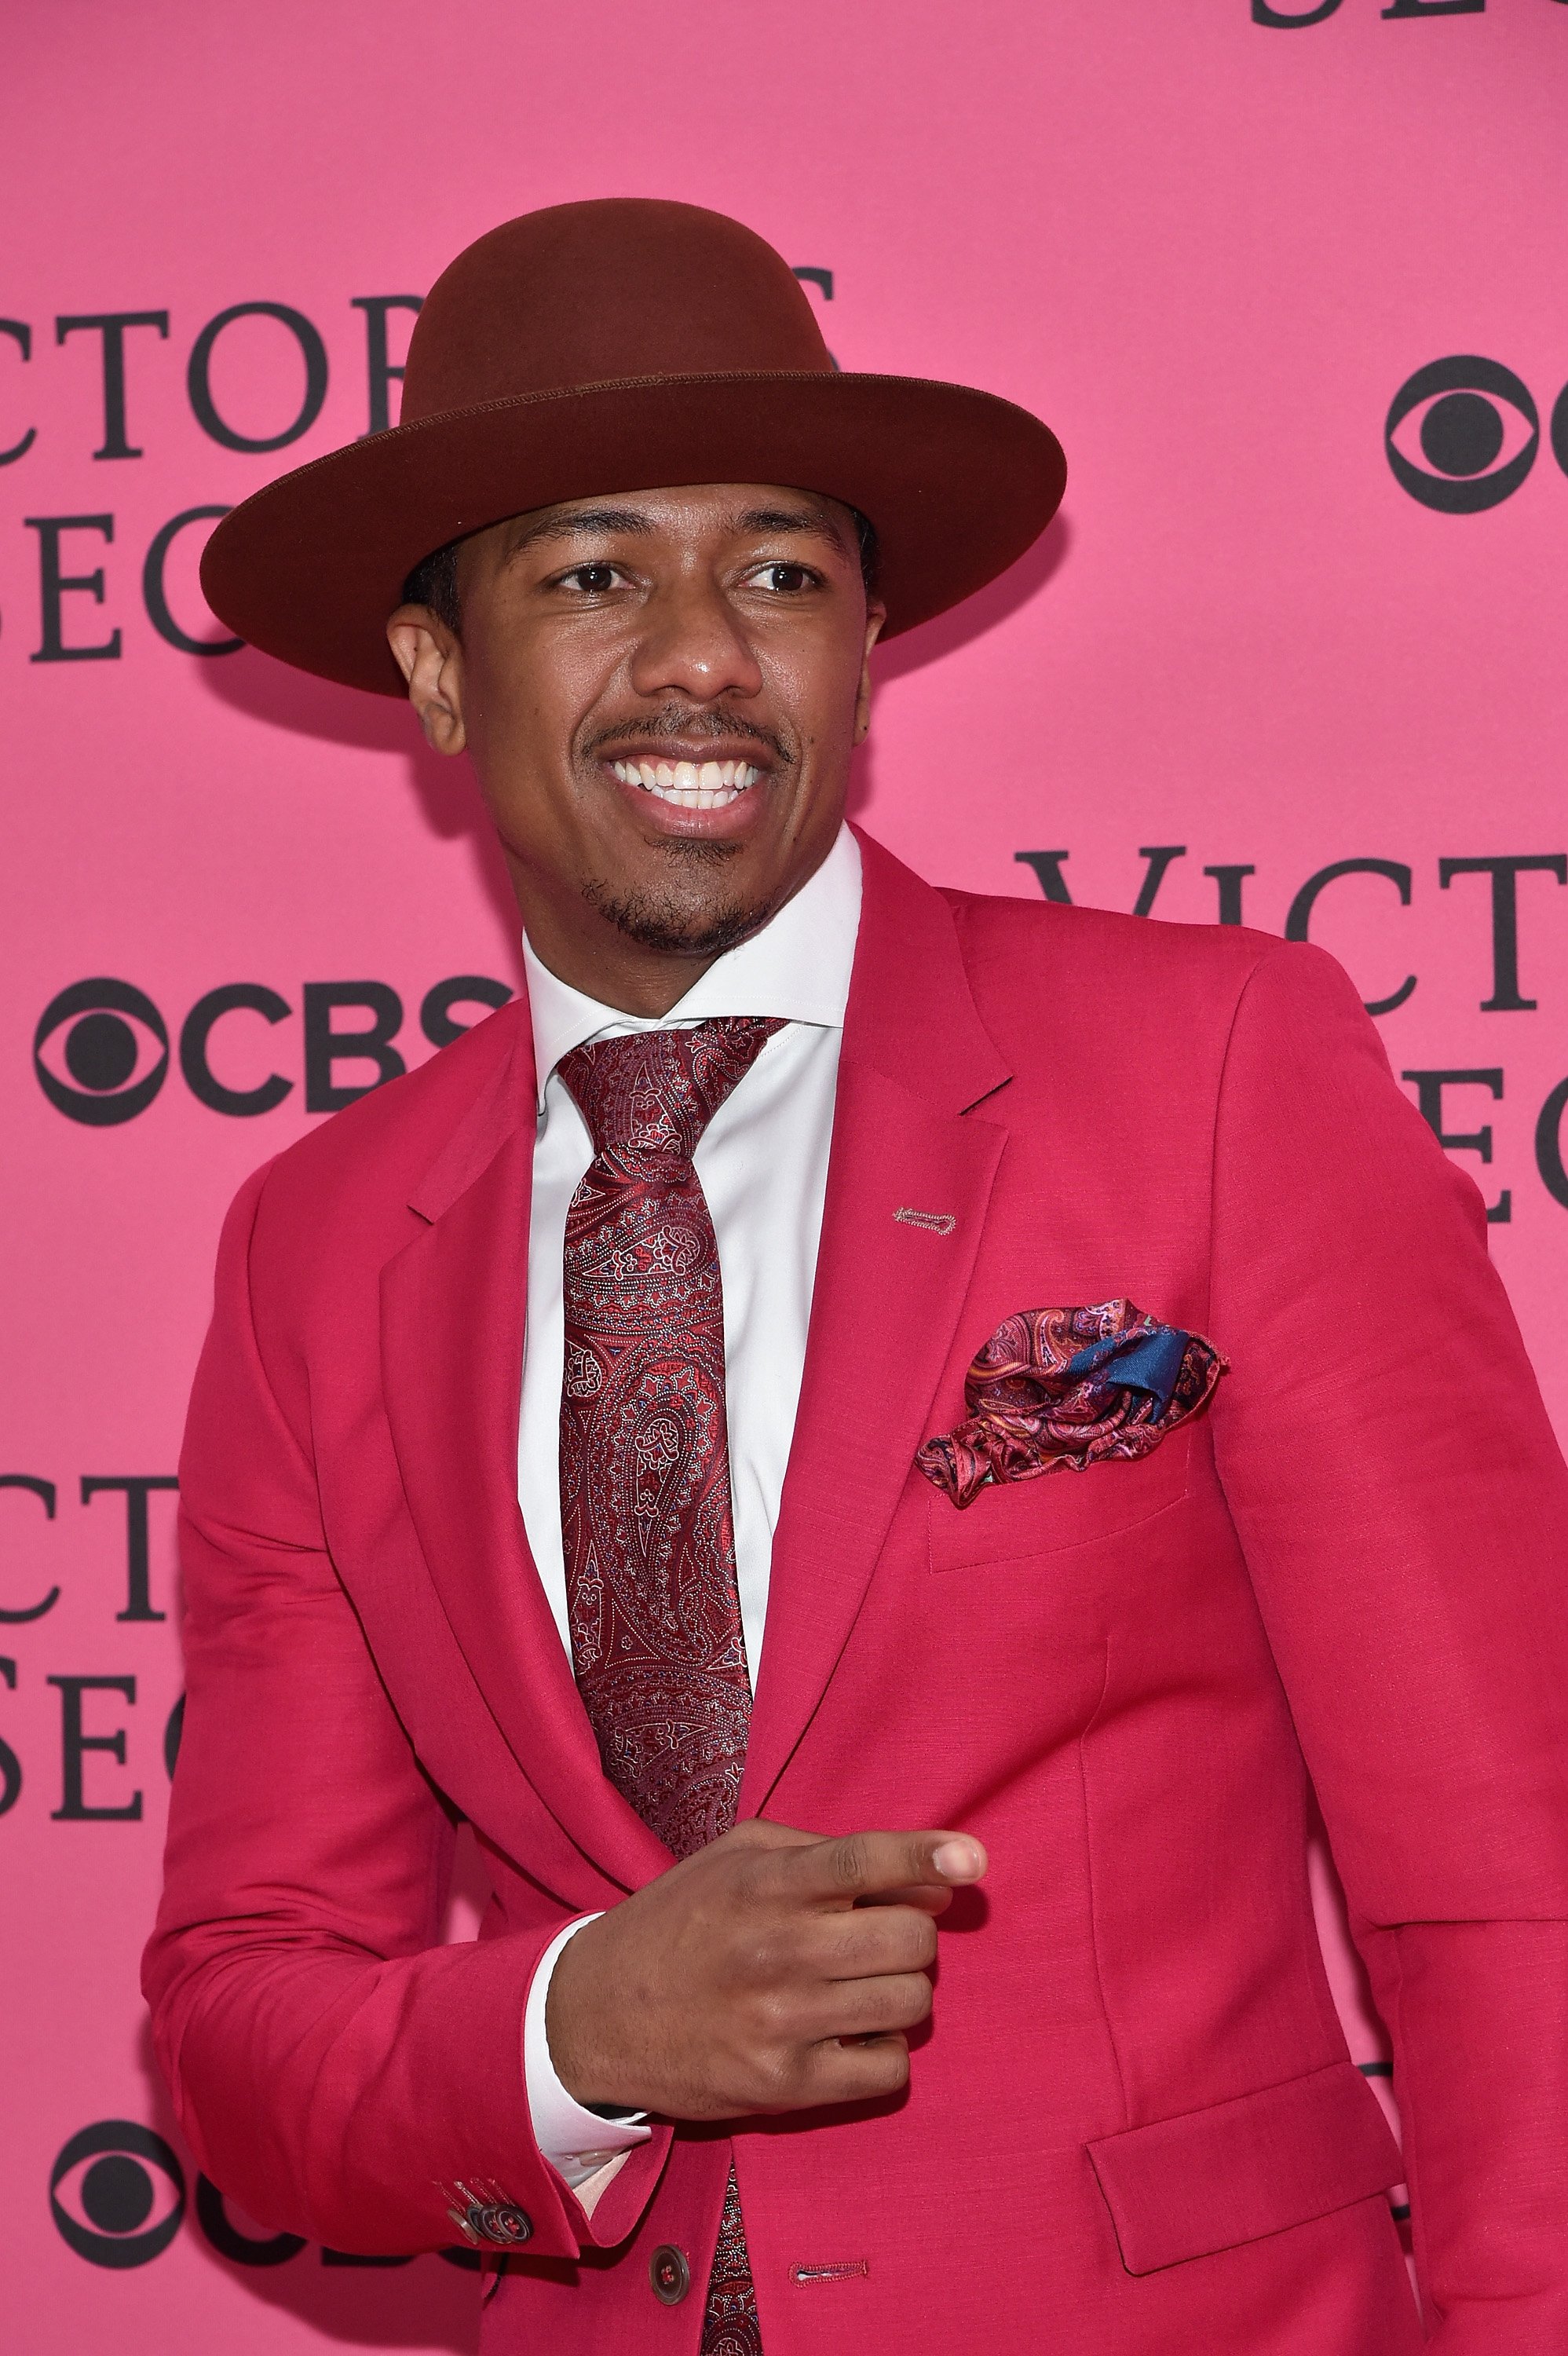 Nick Cannon poses at the 2015 Victoria's Secret Fashion Show on November 10, 2015 in New York City. | Source: Getty Images